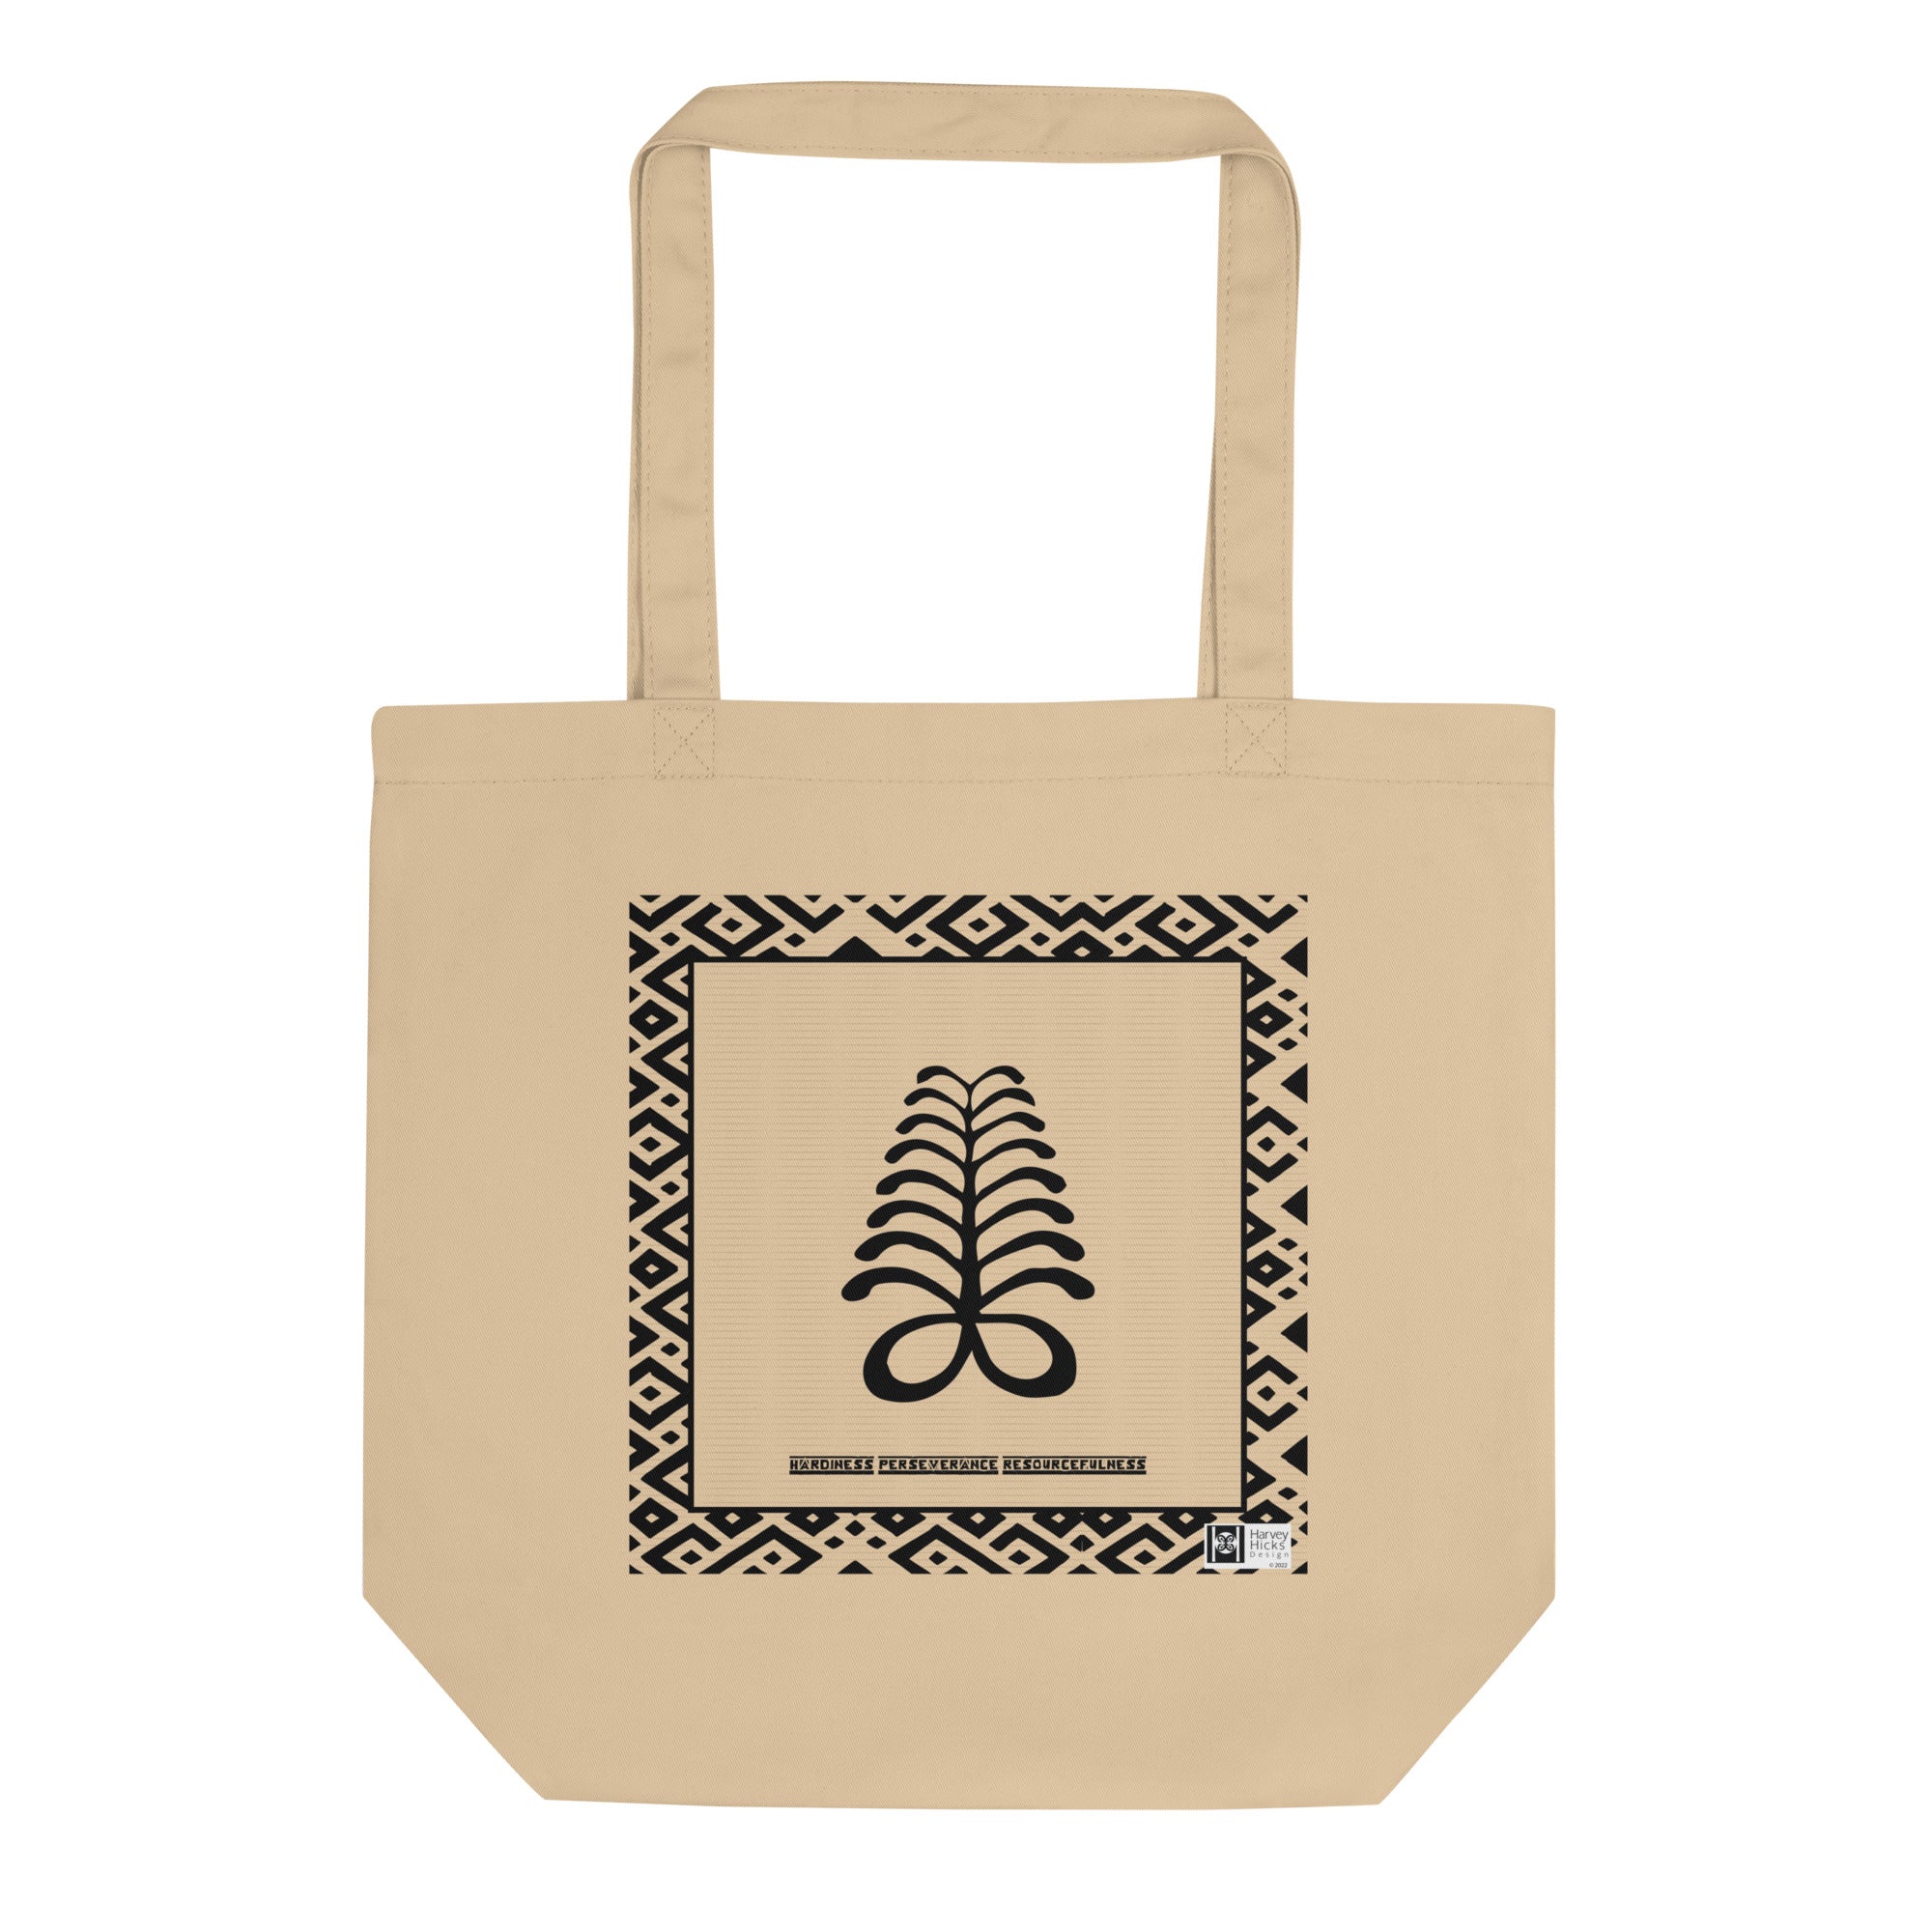 100% cotton Eco Tote Bag, featuring the Adinkra symbol for hardiness